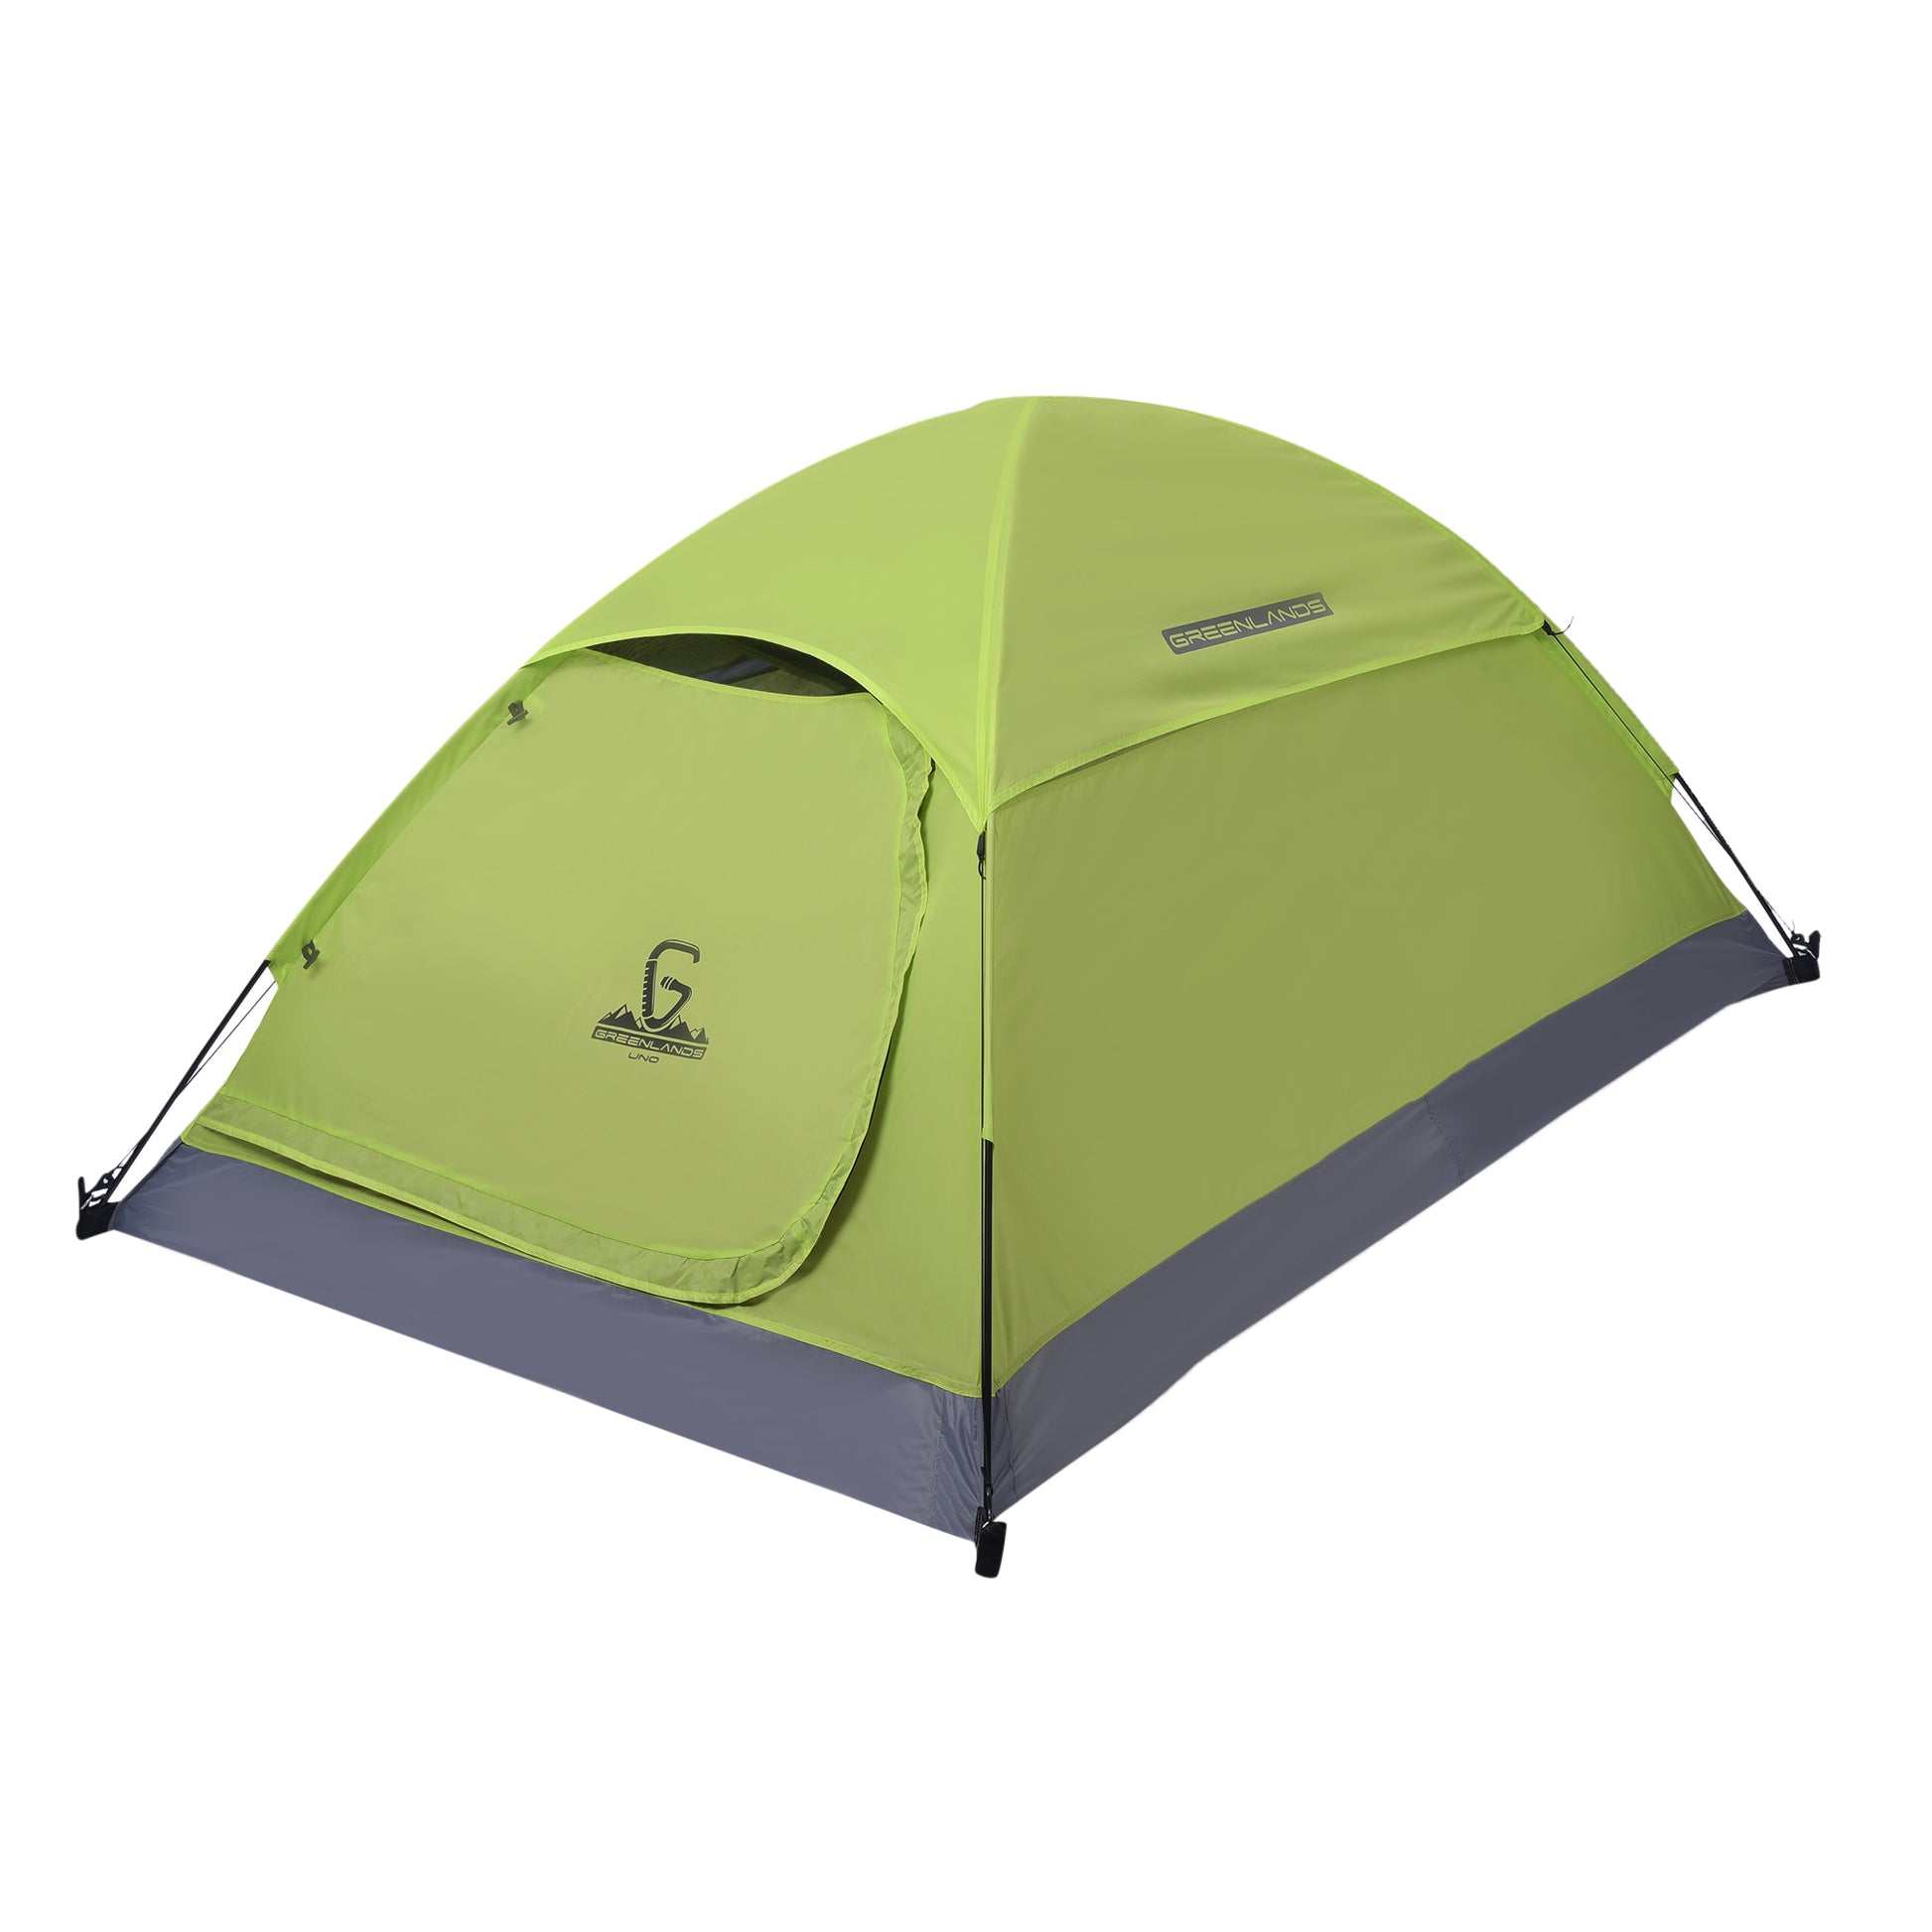 Greenlands UNO 2P Camping Tent